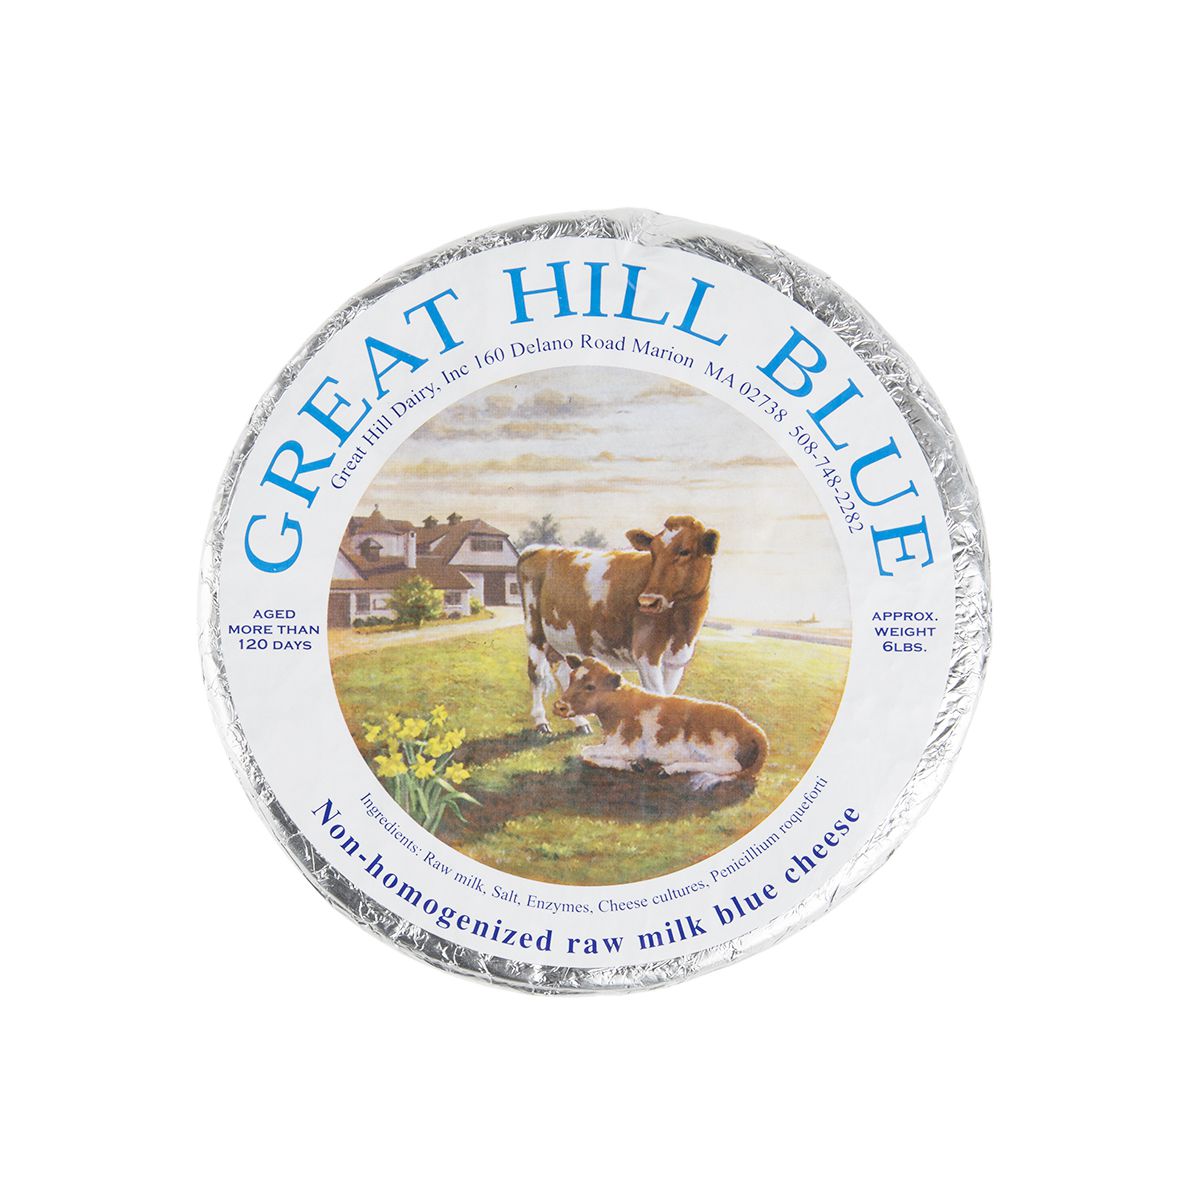 Great Hill Blue Blue Cheese